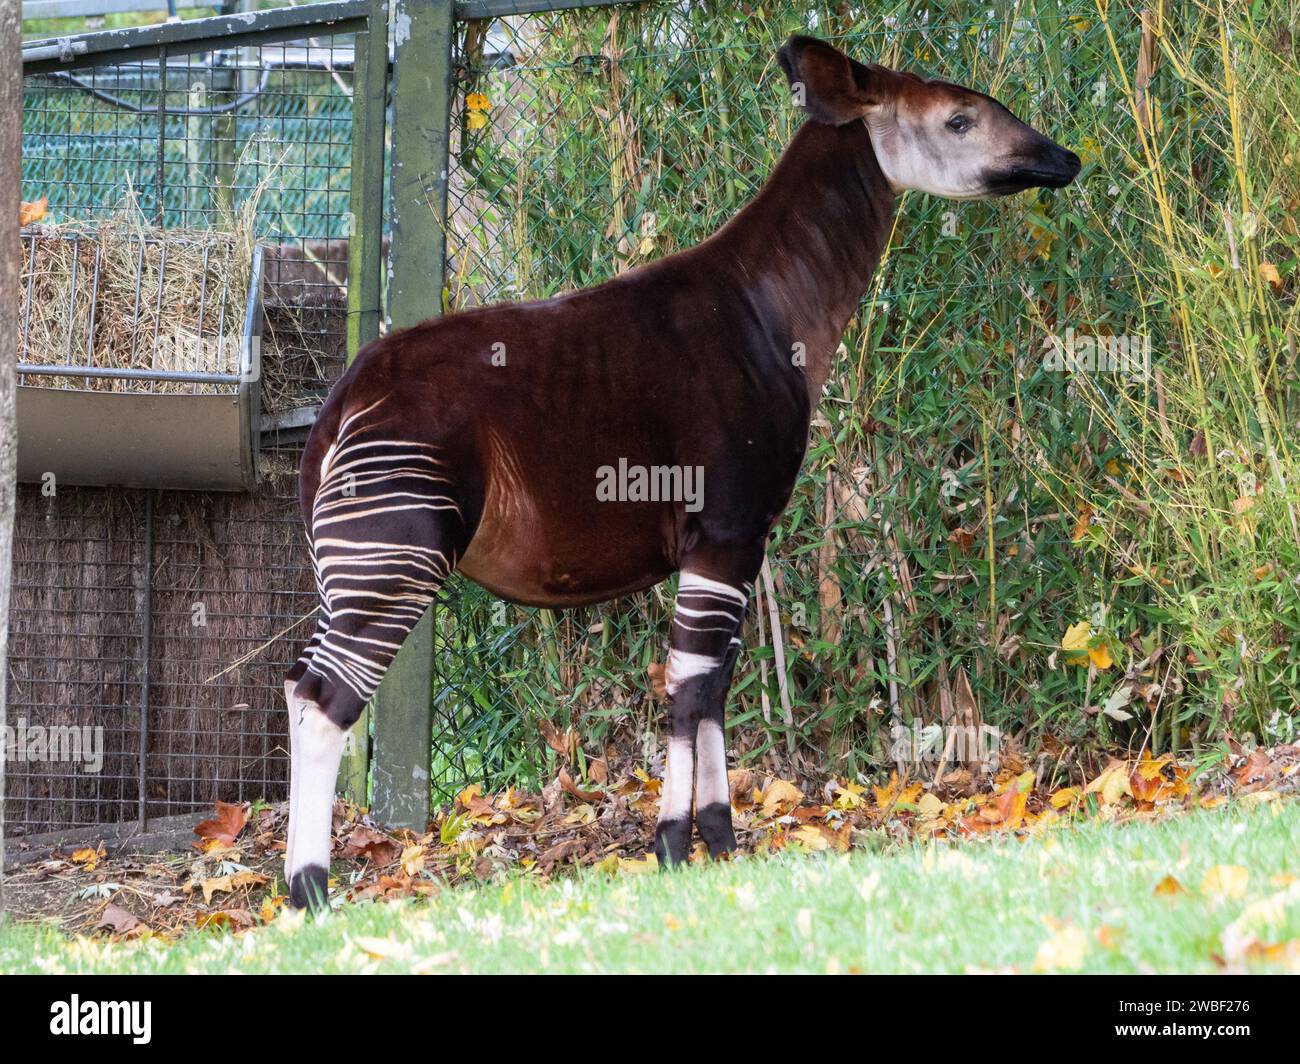 Adorable baby okapi standing in a tranquil outdoor setting Stock Photo